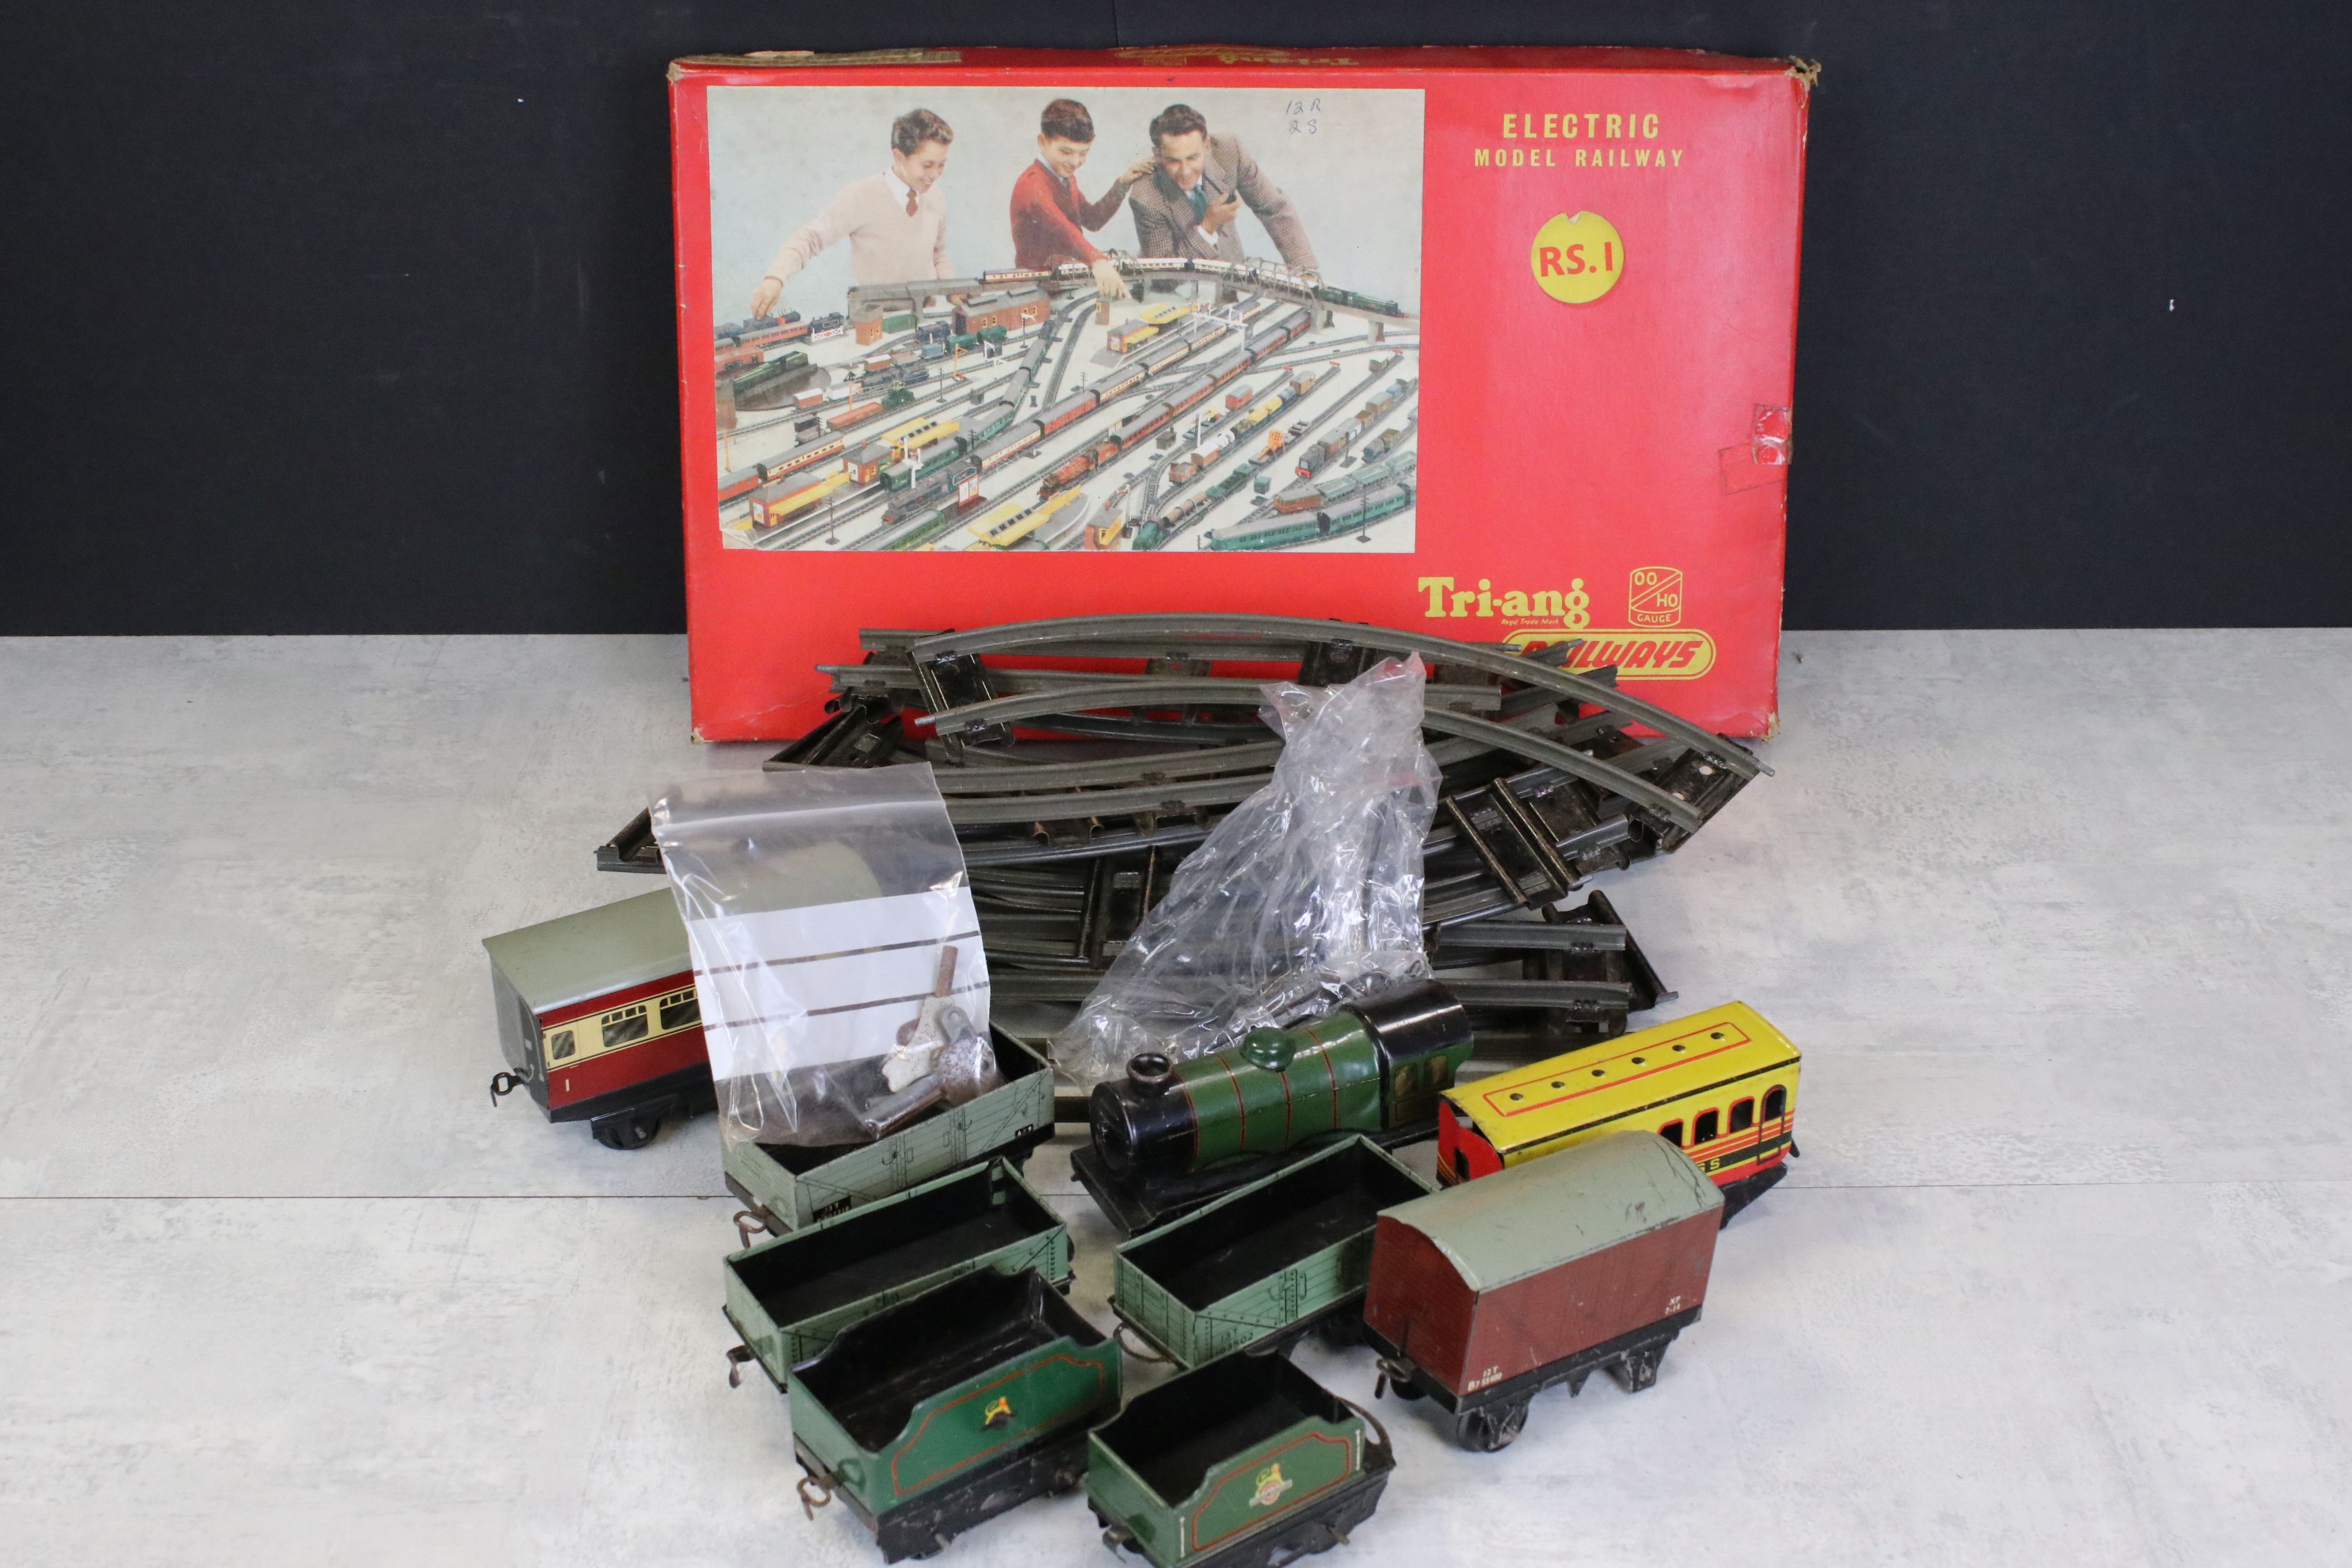 Boxed Triang OO gauge RS 1 train set appearing complete with Princess Royal locomotive, rolling